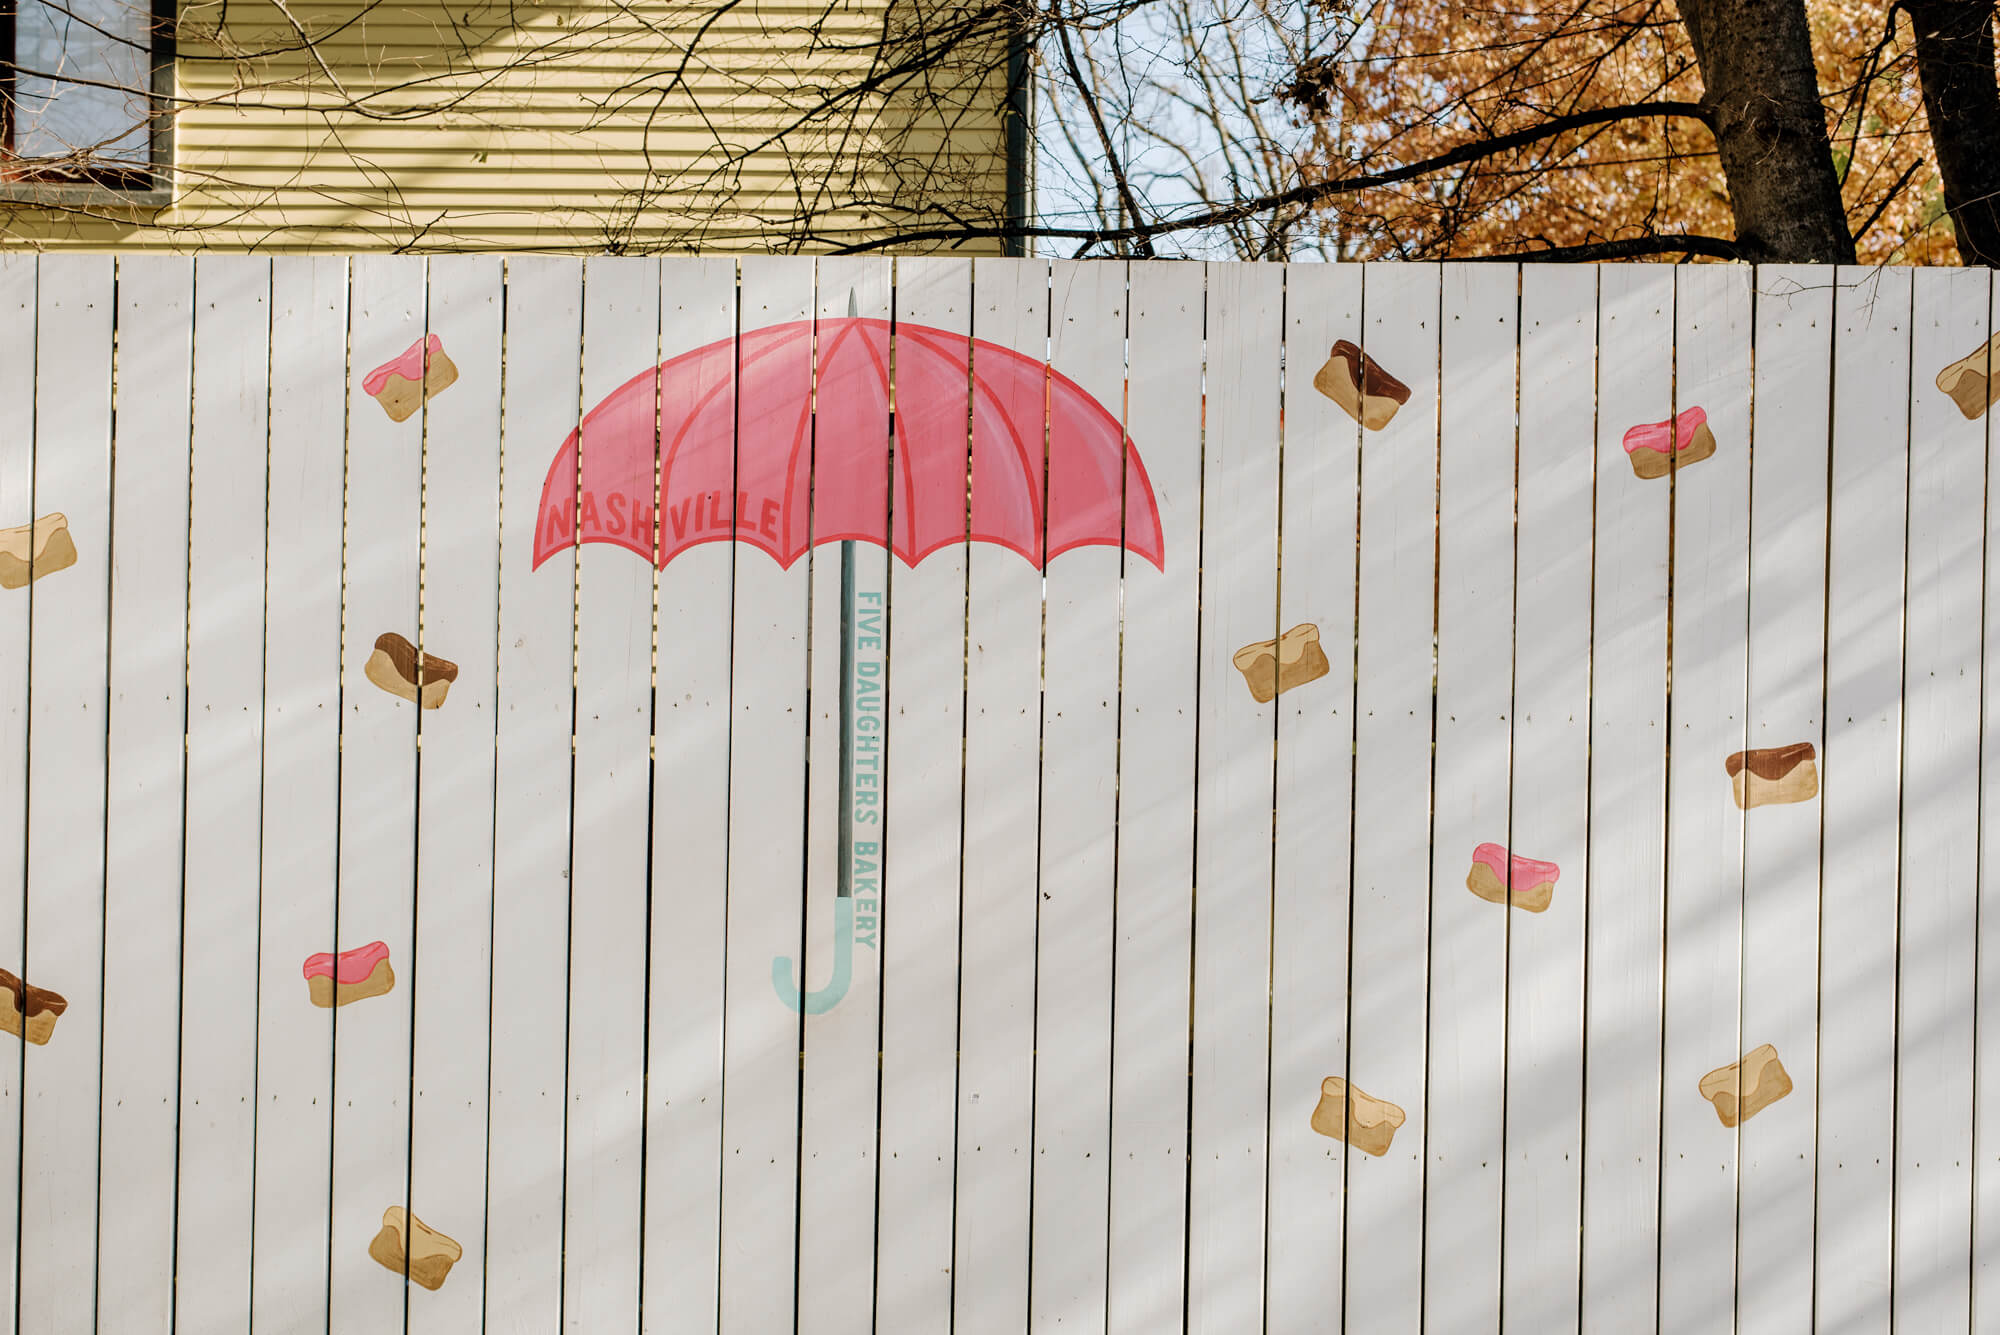 a mural at Five Daughters Bakery in 12 South Nashville. Doughnuts pelt a pink umbrella painted on a white fence.